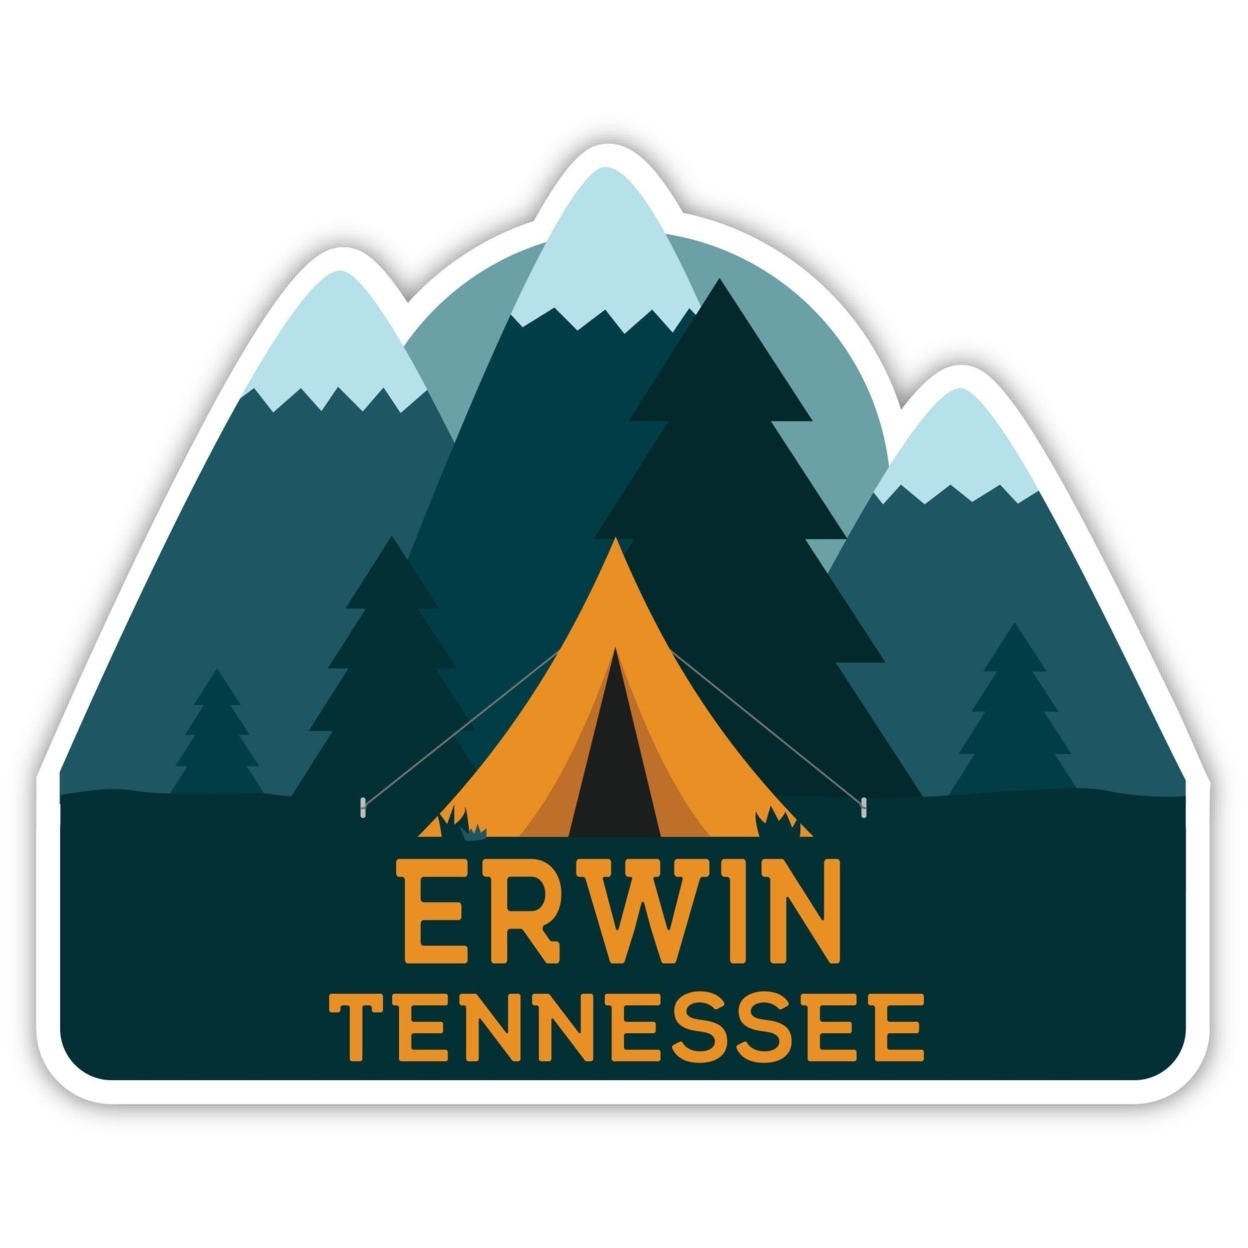 Erwin Tennessee Souvenir Decorative Stickers (Choose Theme And Size) - Single Unit, 4-Inch, Tent